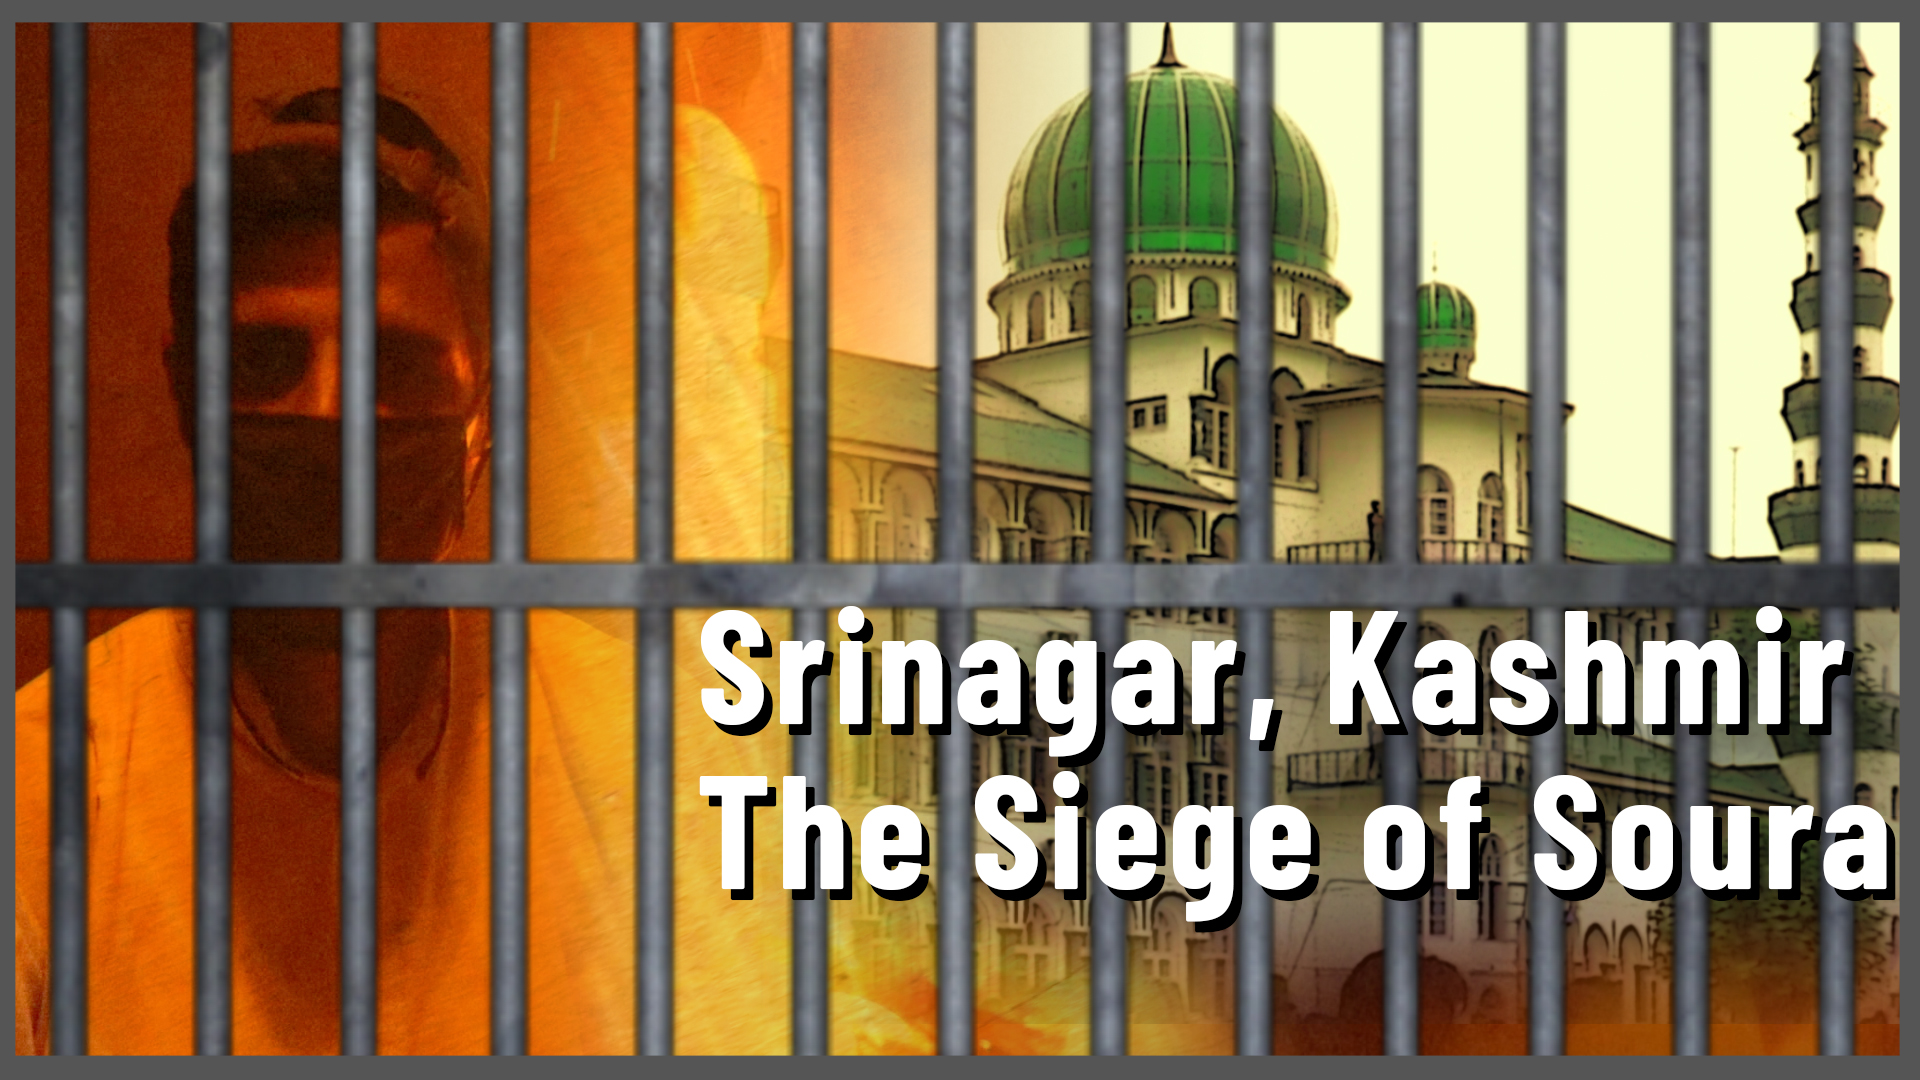 Srinagar, Kashmir: The Protests and Siege of Soura